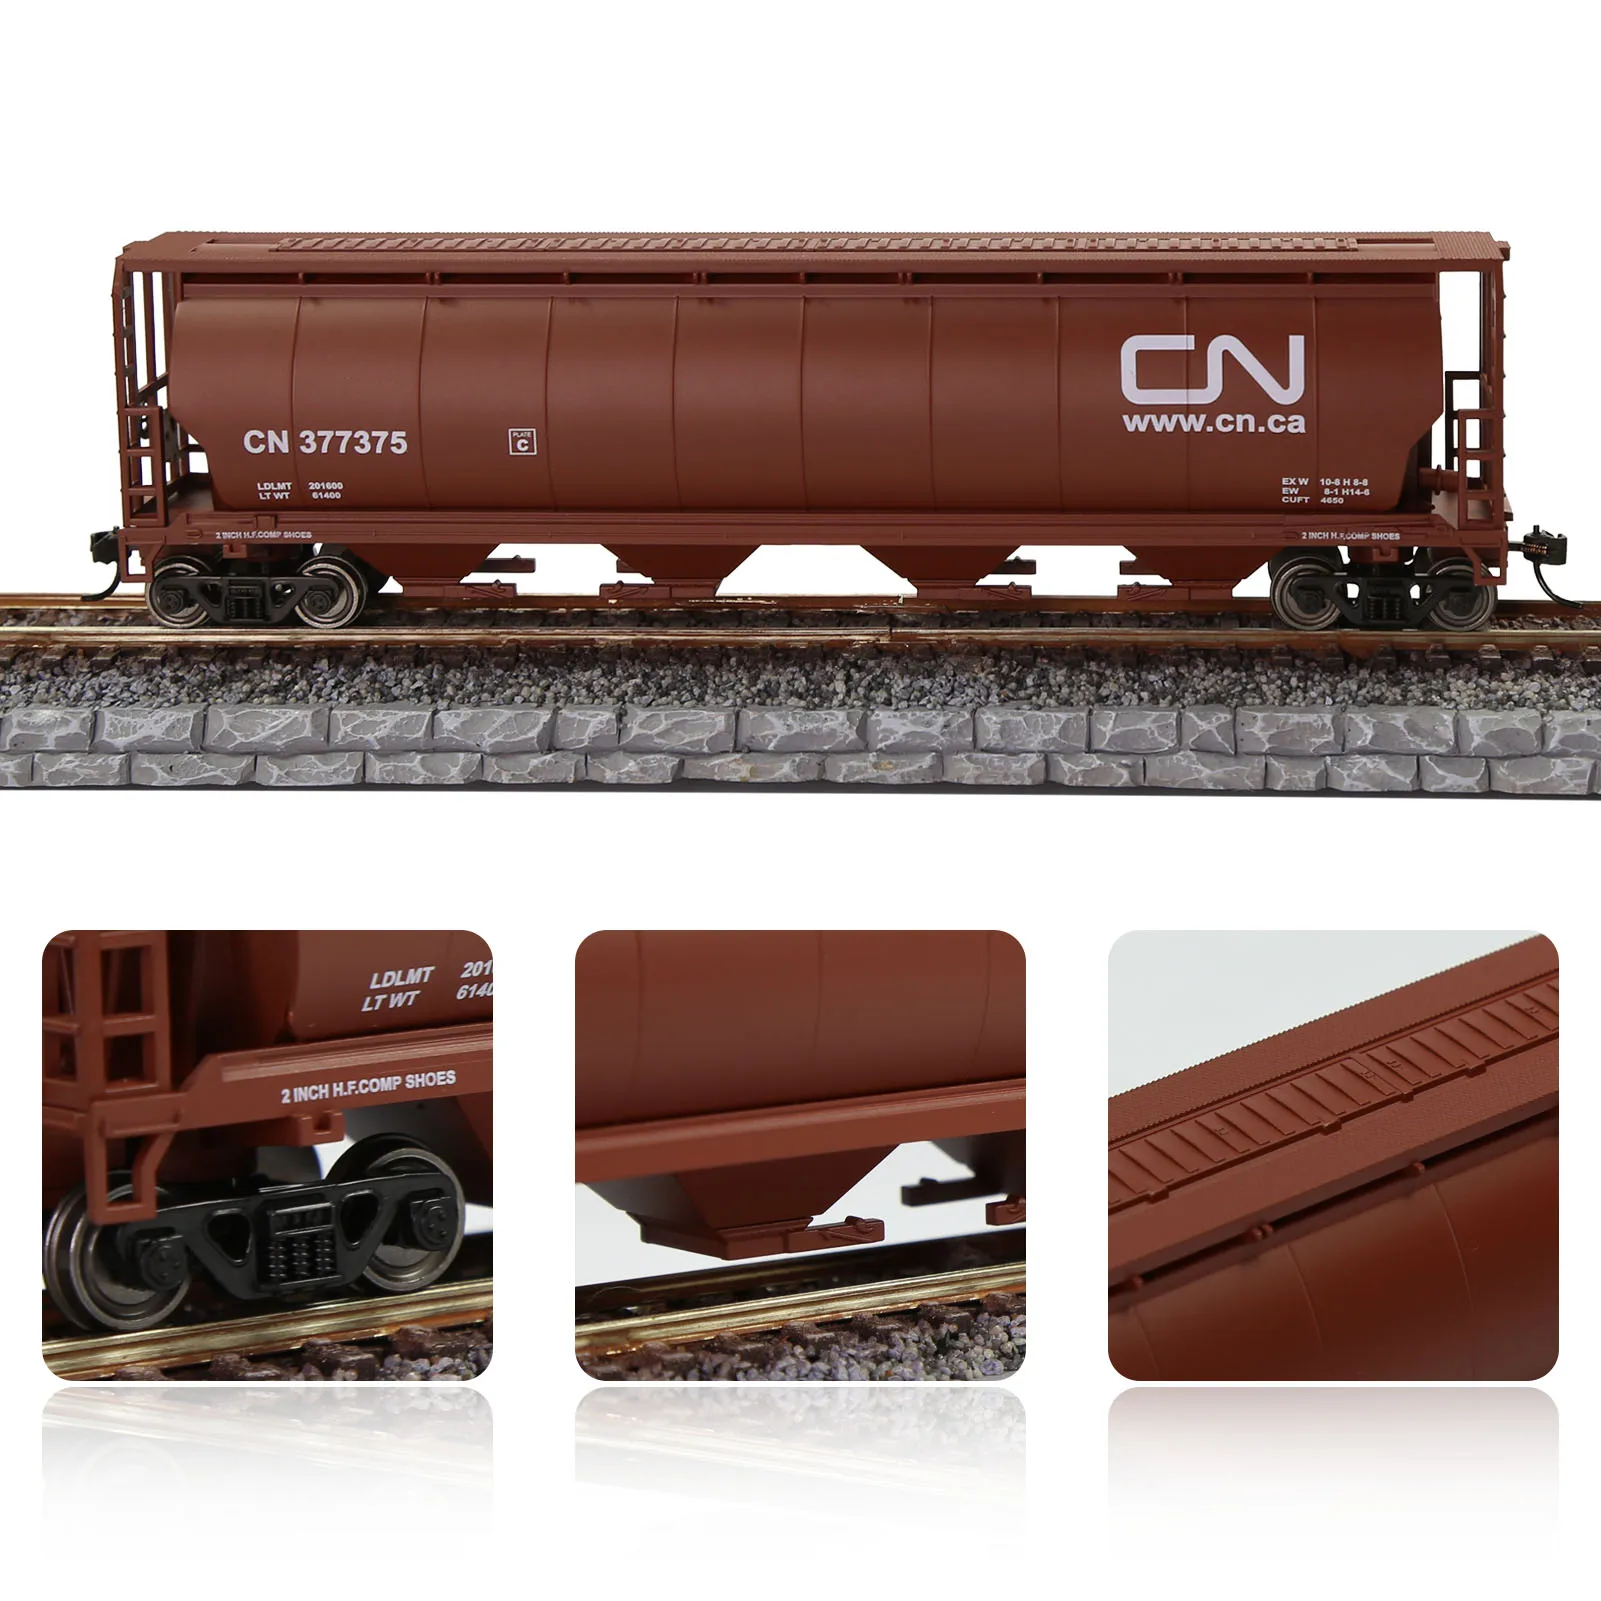 

1 Unit Evemodel Trains HO Scale Canadian Cylindrical Covered Grain Hopper - Canadian National (Oxide red) C8744PBCN